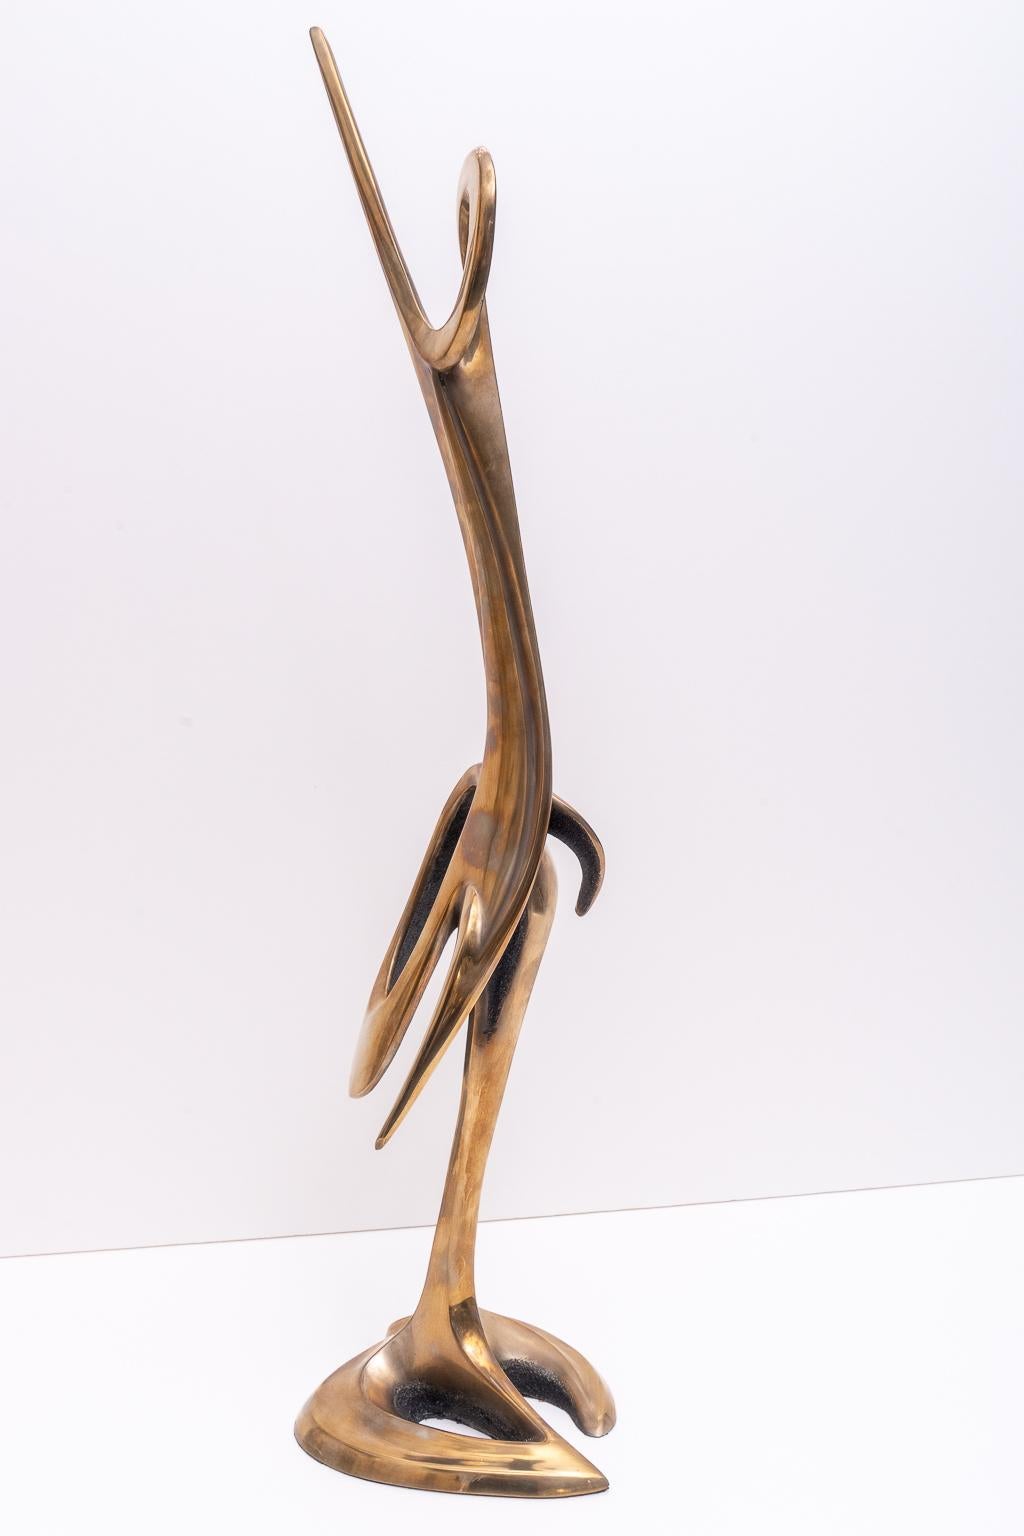 This stylish and chic bronze sculpture by the American sculptor Robert Bennet dates to 1985 and was acquired from a Palm Beach estate. The stylized form is that of two cranes intertwined.